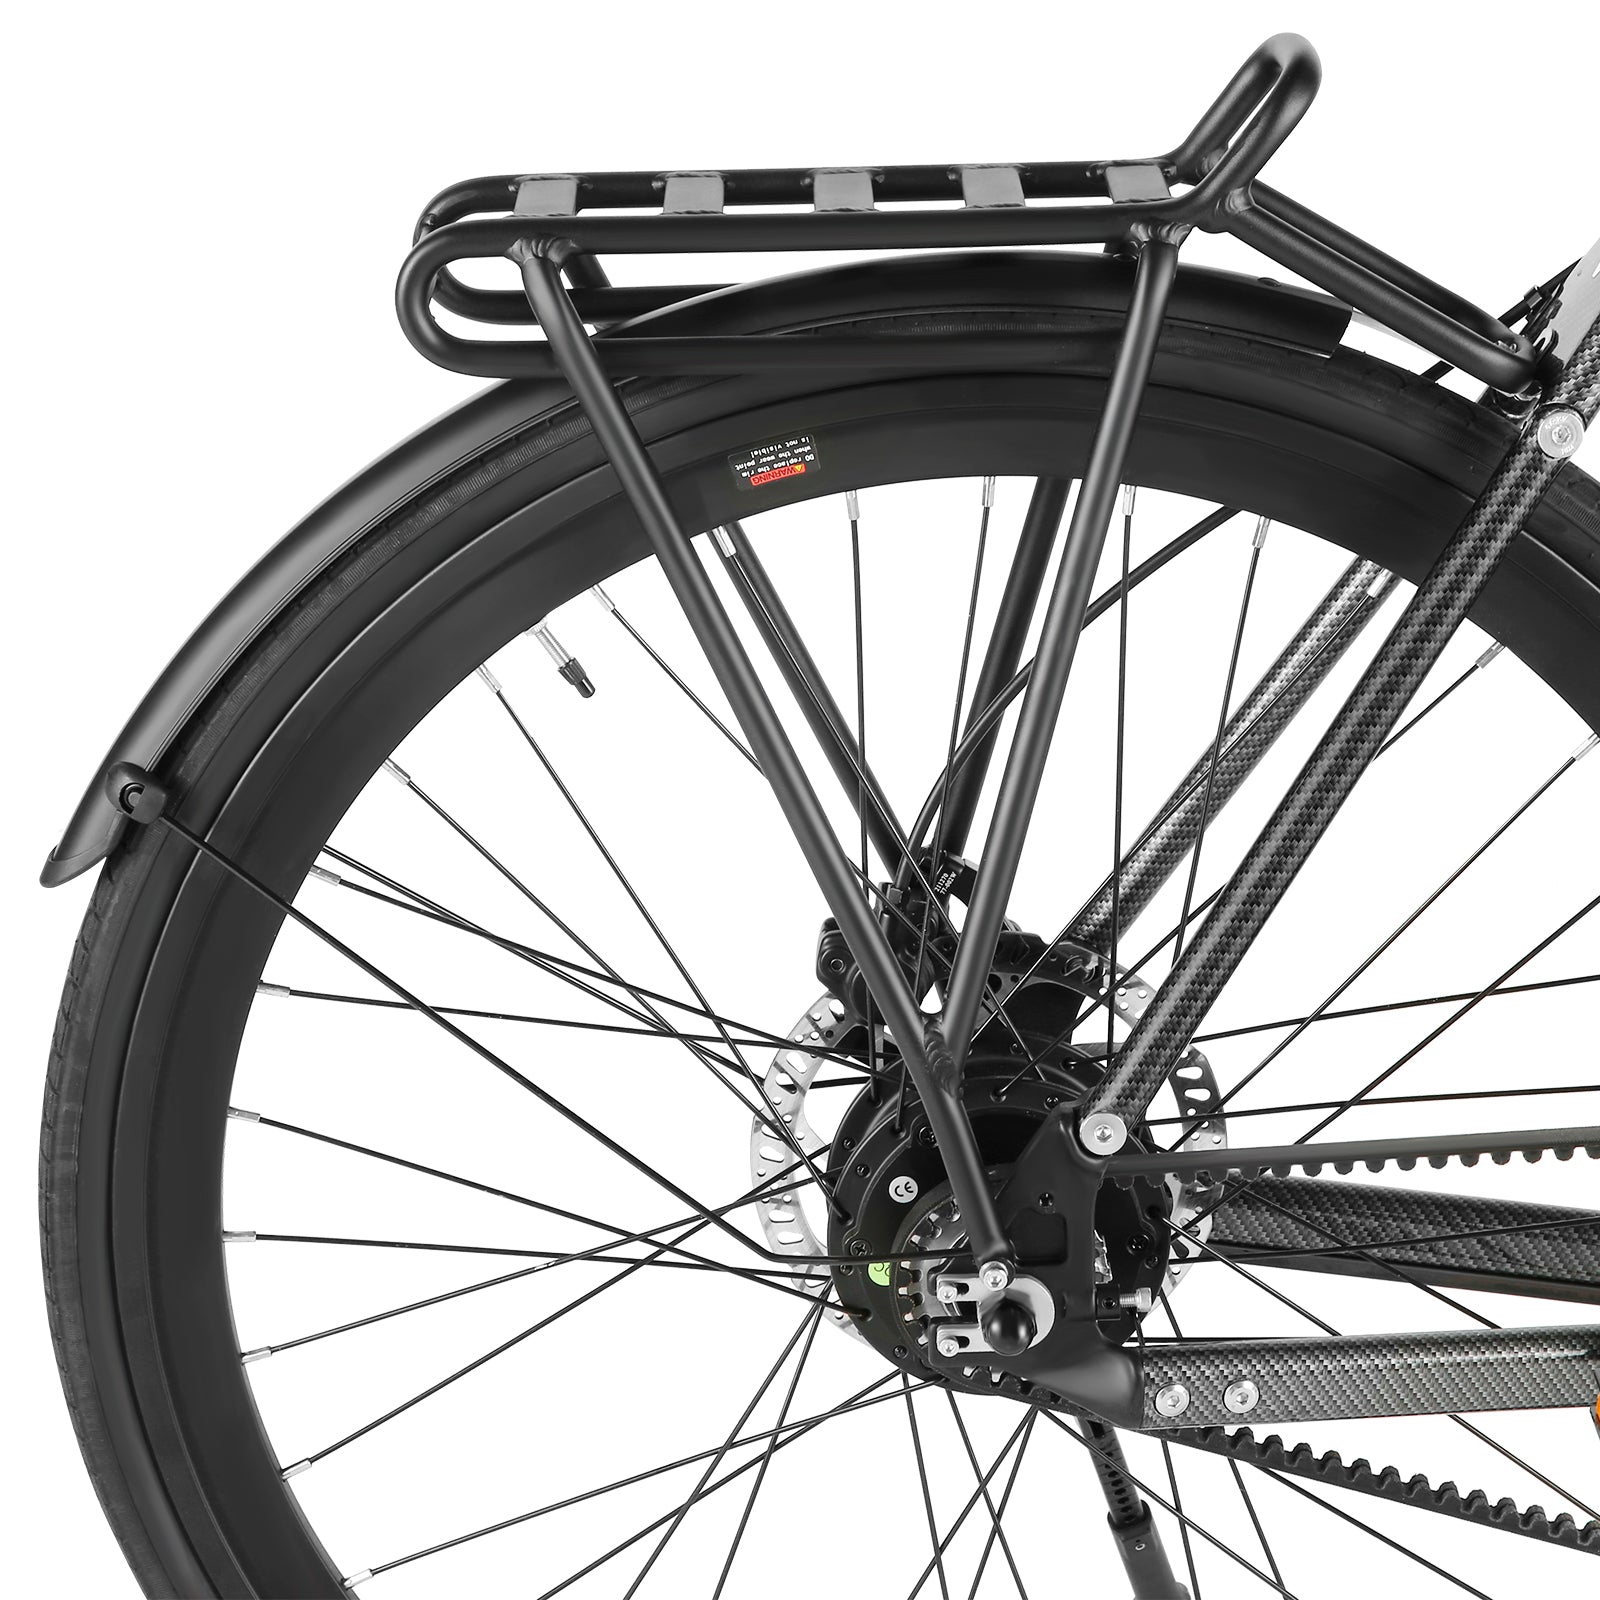 The City Vanture electric bike rear rack is made of aluminum alloy, weighs 1.3 kg and is durable. It combines fashion and practicality. This rear rack is fully compatible with the City Vanture Electric Bike for Commuting Electric Bike.